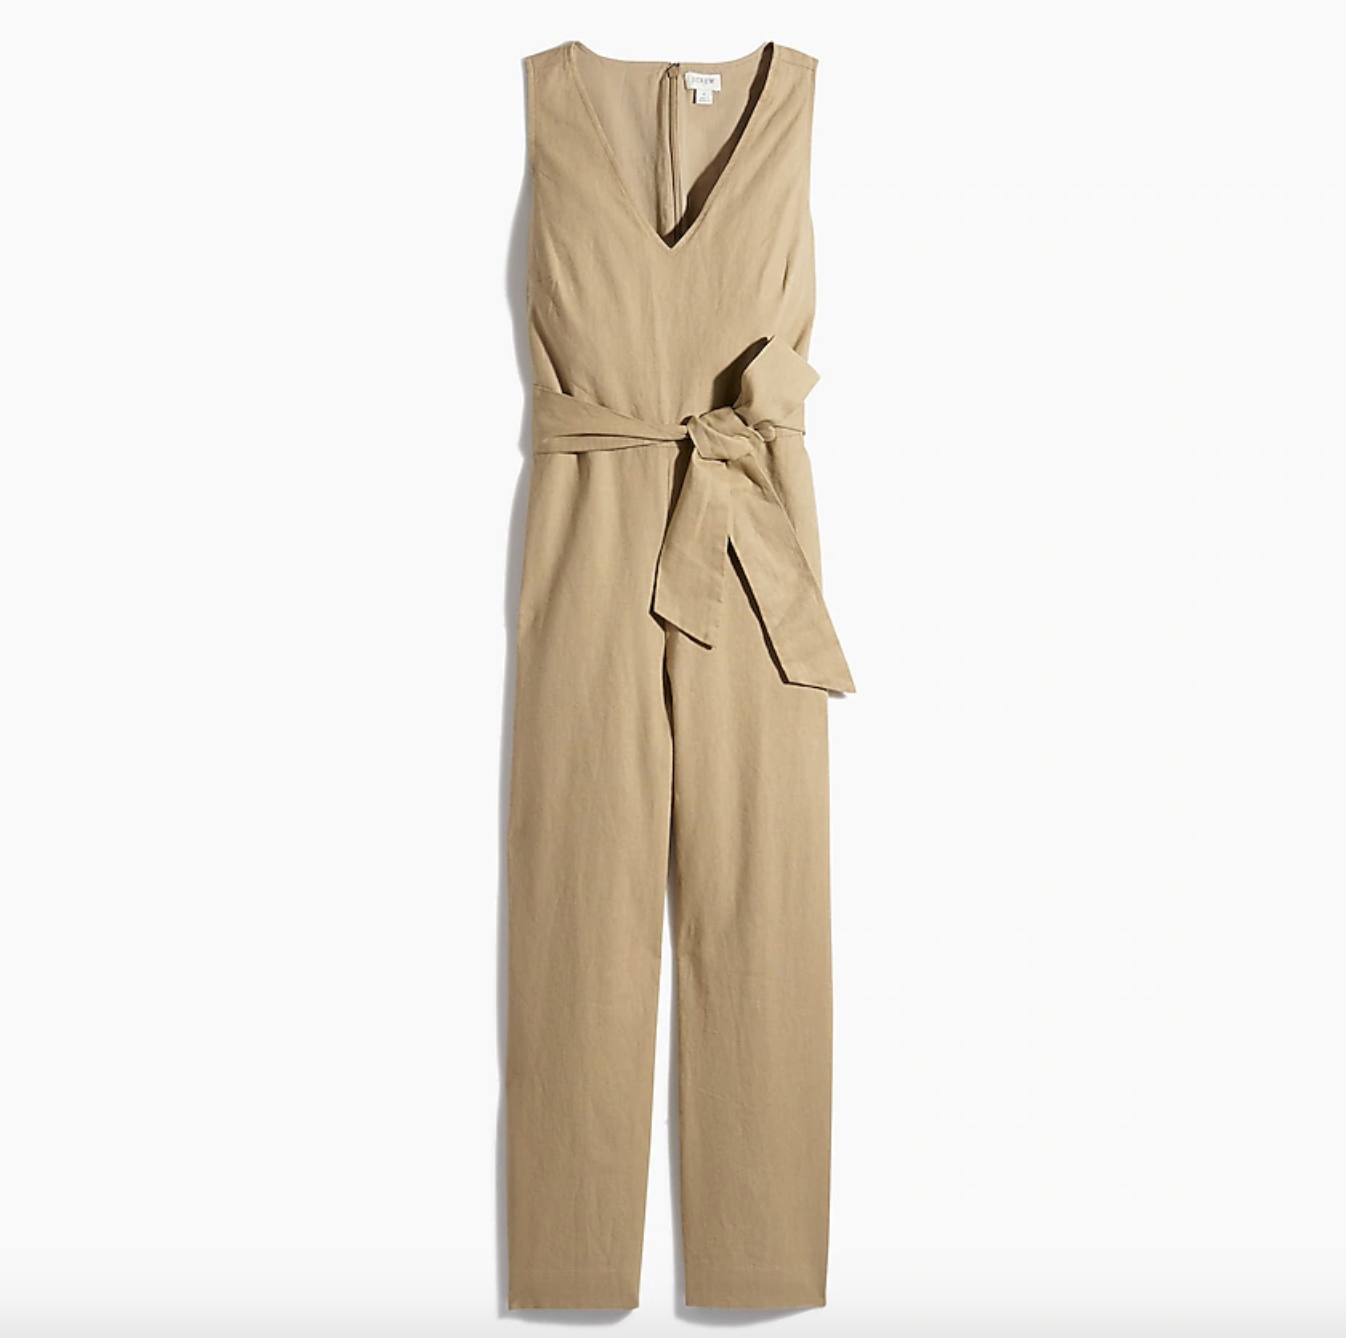 the sleeveless tan jumpsuit, which has a tie waist